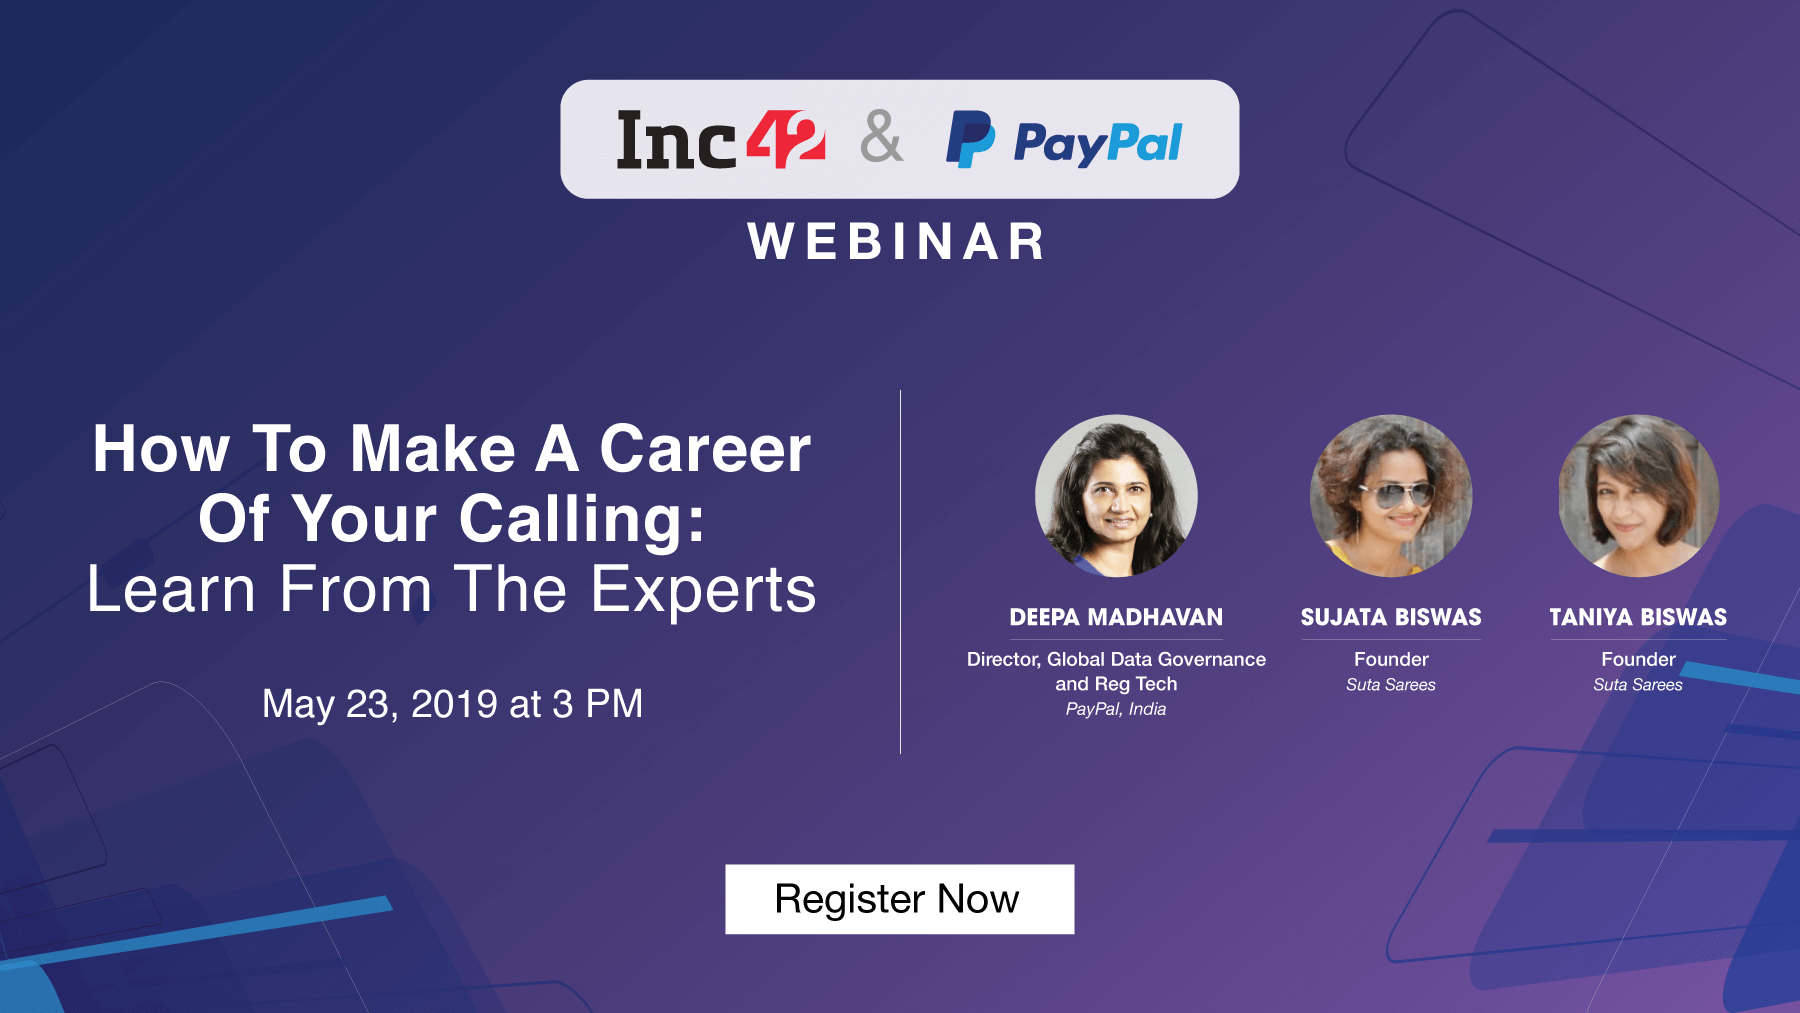 Webinar: How To Make A Career Of Your Calling - Learn From The Experts